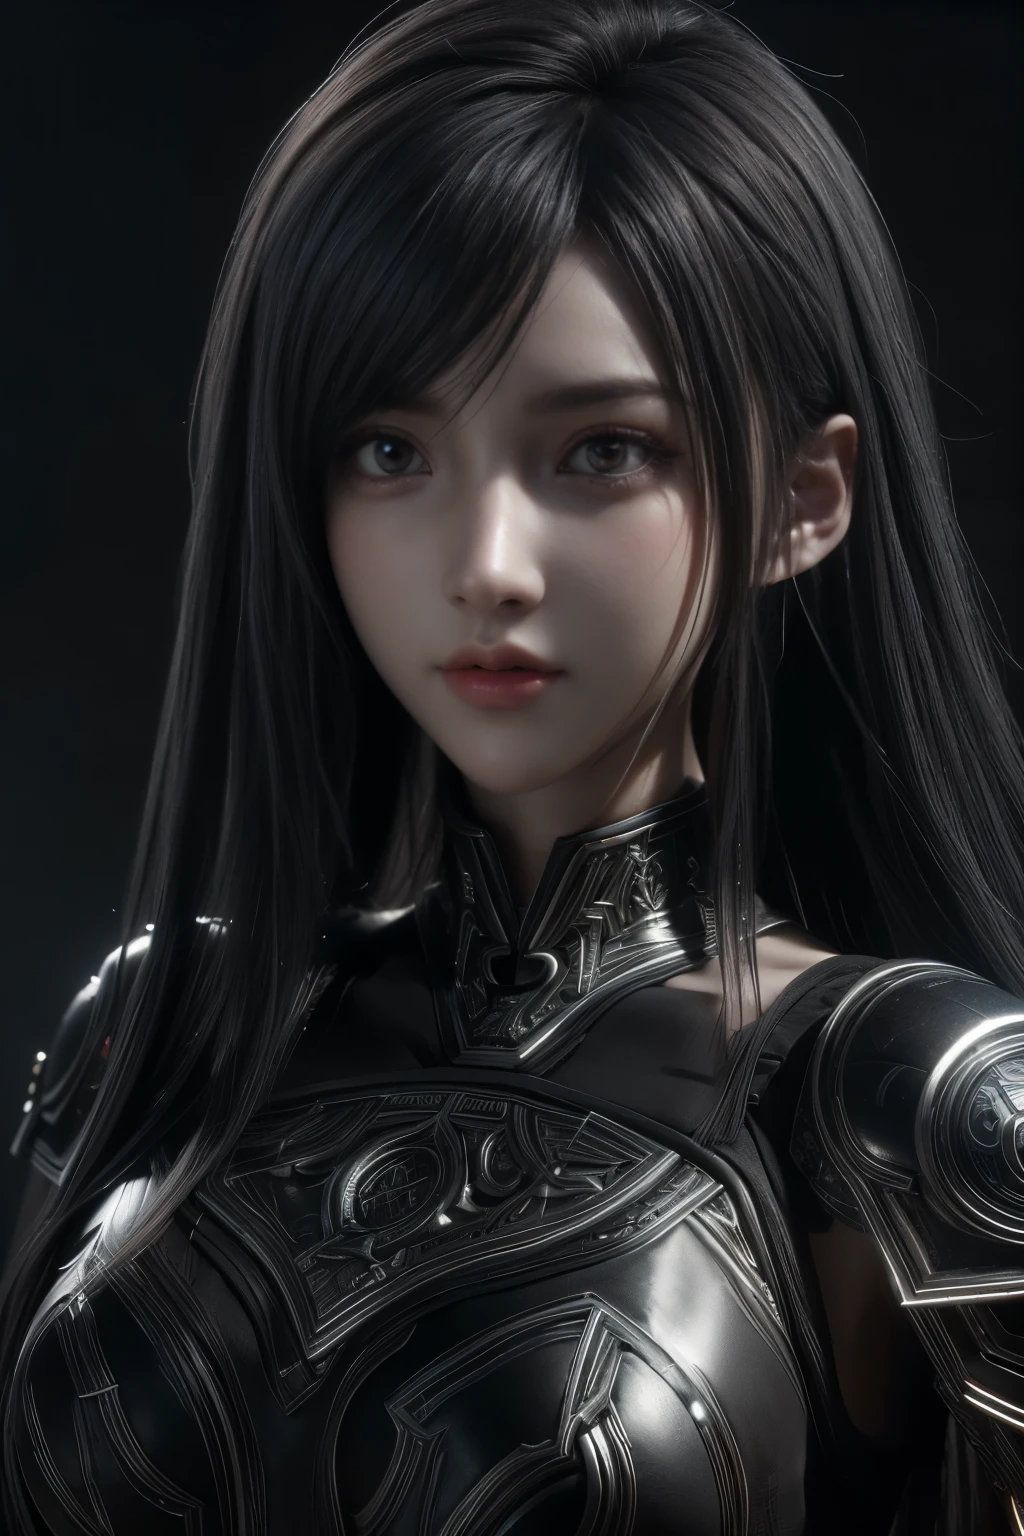 Masterpiece,Game art,The best picture quality,Highest resolution,8K,(Portrait),Unreal Engine 5 rendering works,(Digital Photography),((Portrait Feature:1.5)),
20 year old girl,Short hair details,With long bangs,(The red eye makeup is very meticulous),(With long gray hair:1.4),(Large, full breasts),Elegant and noble,Brave and charming,
(Future armor combined with the characteristics of ancient Chinese armor,Hollow design,Power Armor,The mysterious Eastern runes,A delicate dress pattern,A flash of magic,White),Warrior of the future,Cyberpunk figures,Background of war,
Movie lights，Ray tracing，Game CG，((3D Unreal Engine))，OC rendering reflection pattern